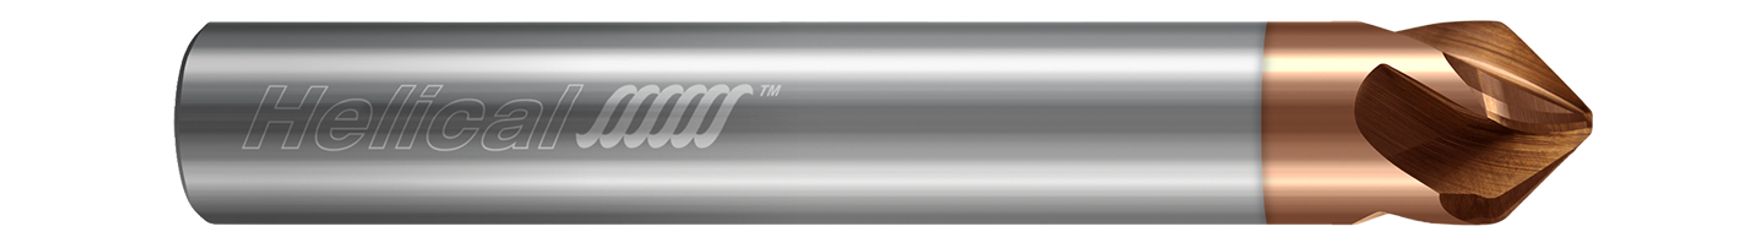 Multi-Axis Finishers-4 Flute-Taper Form (Tplus)